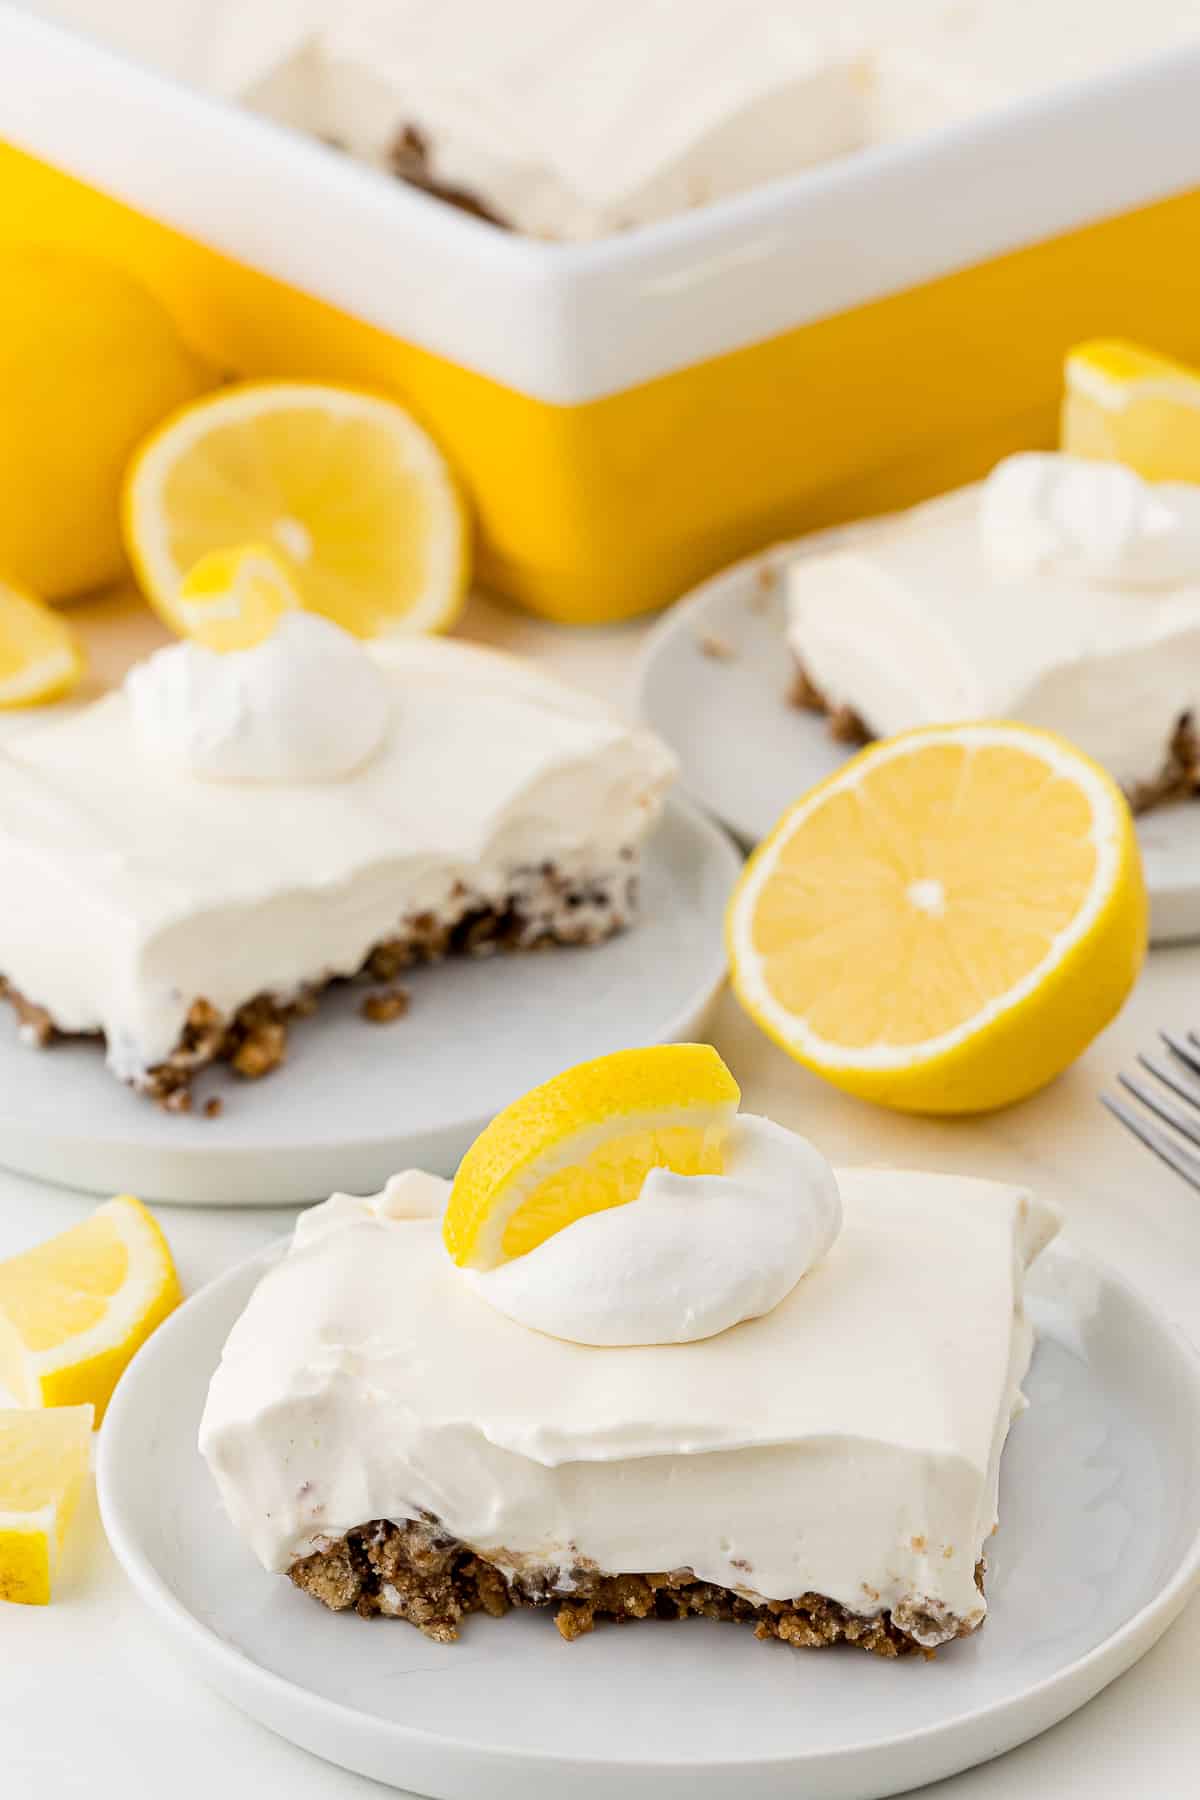 Lemon pie slices on plates with a large dish pie in the background